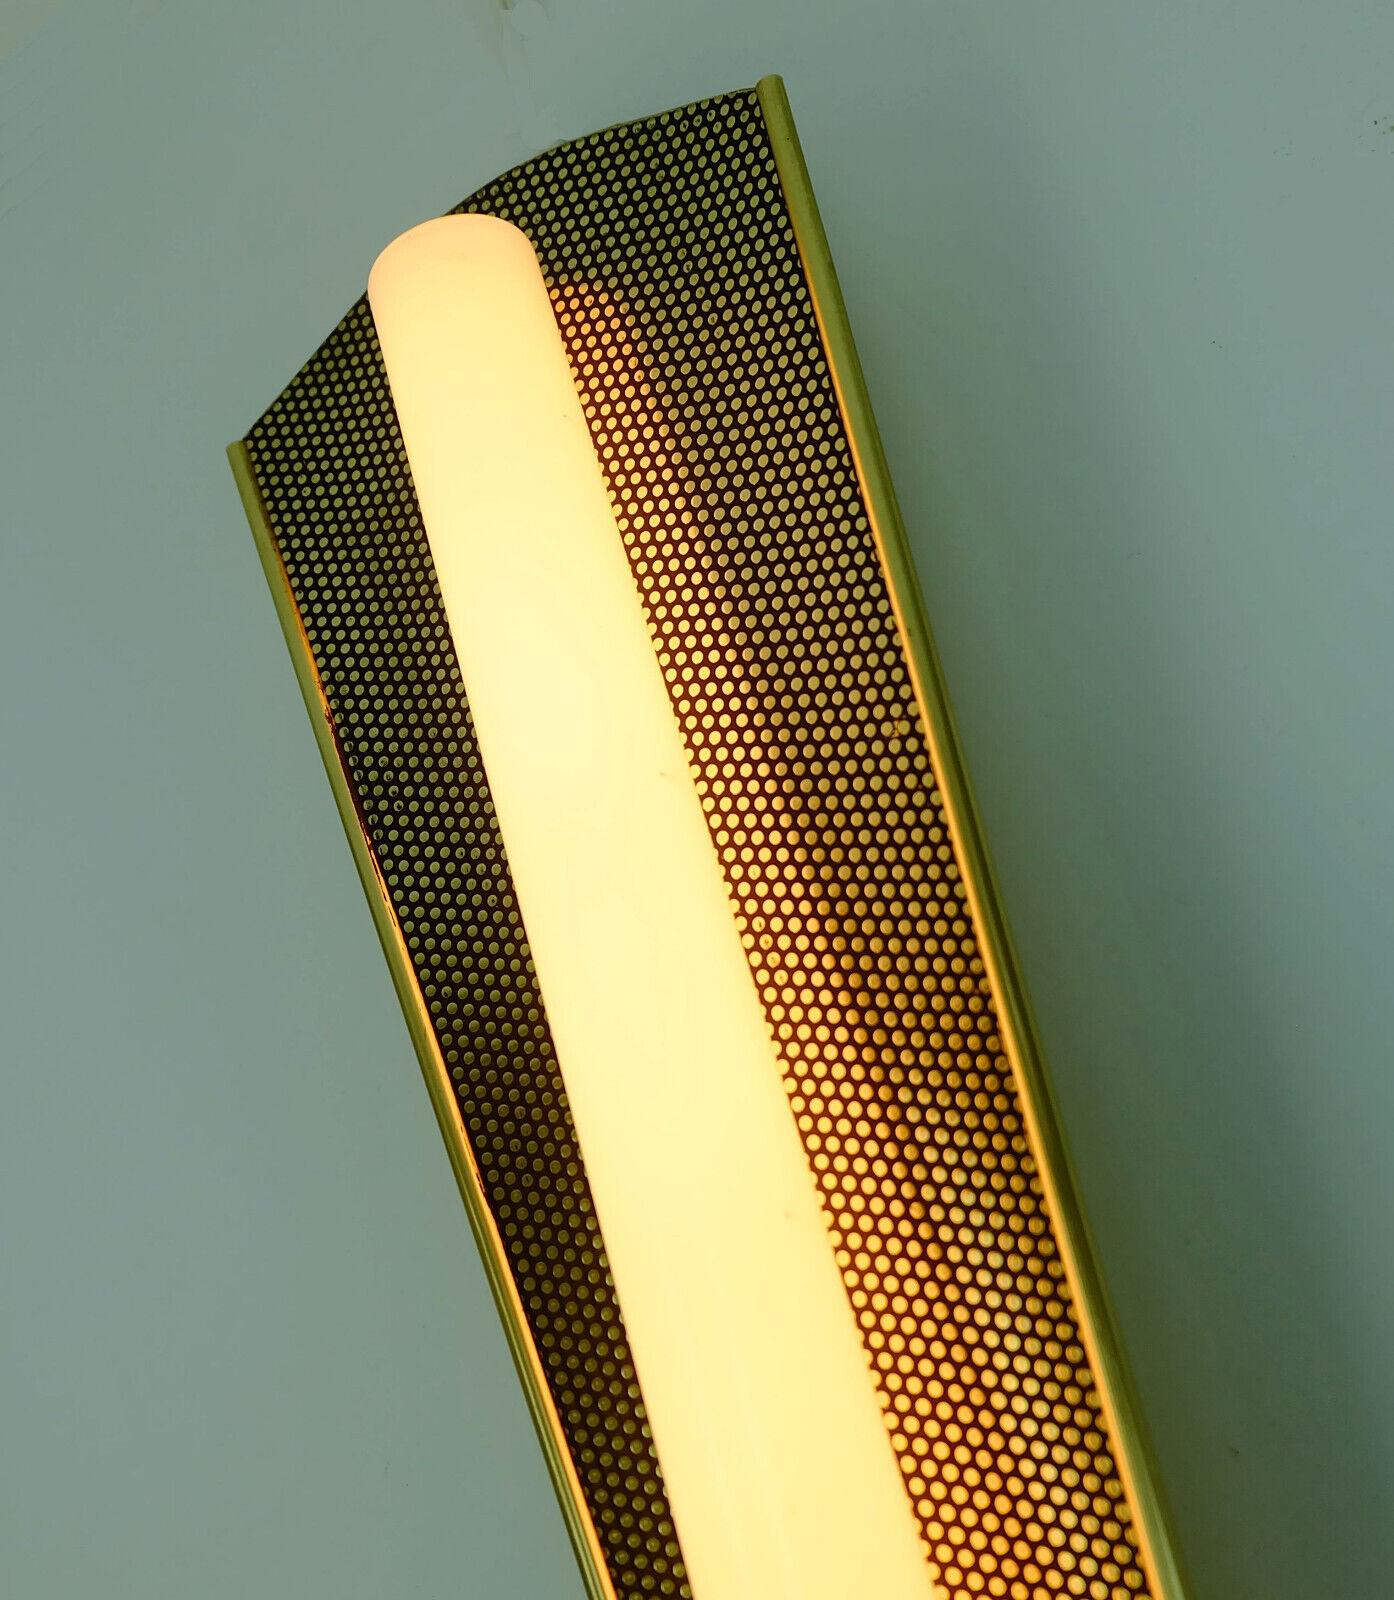 Elegant wall lamp by Erco from the 50s/60s. Made of gold-colored and black metal. With fluorescent tube (the tube is part of the offer). Drawbar switch. 

Dimensions in cm:
Length 37.5 cm, max. width 13 cm, depth 6 cm.

Dimensions in inches: 
Length